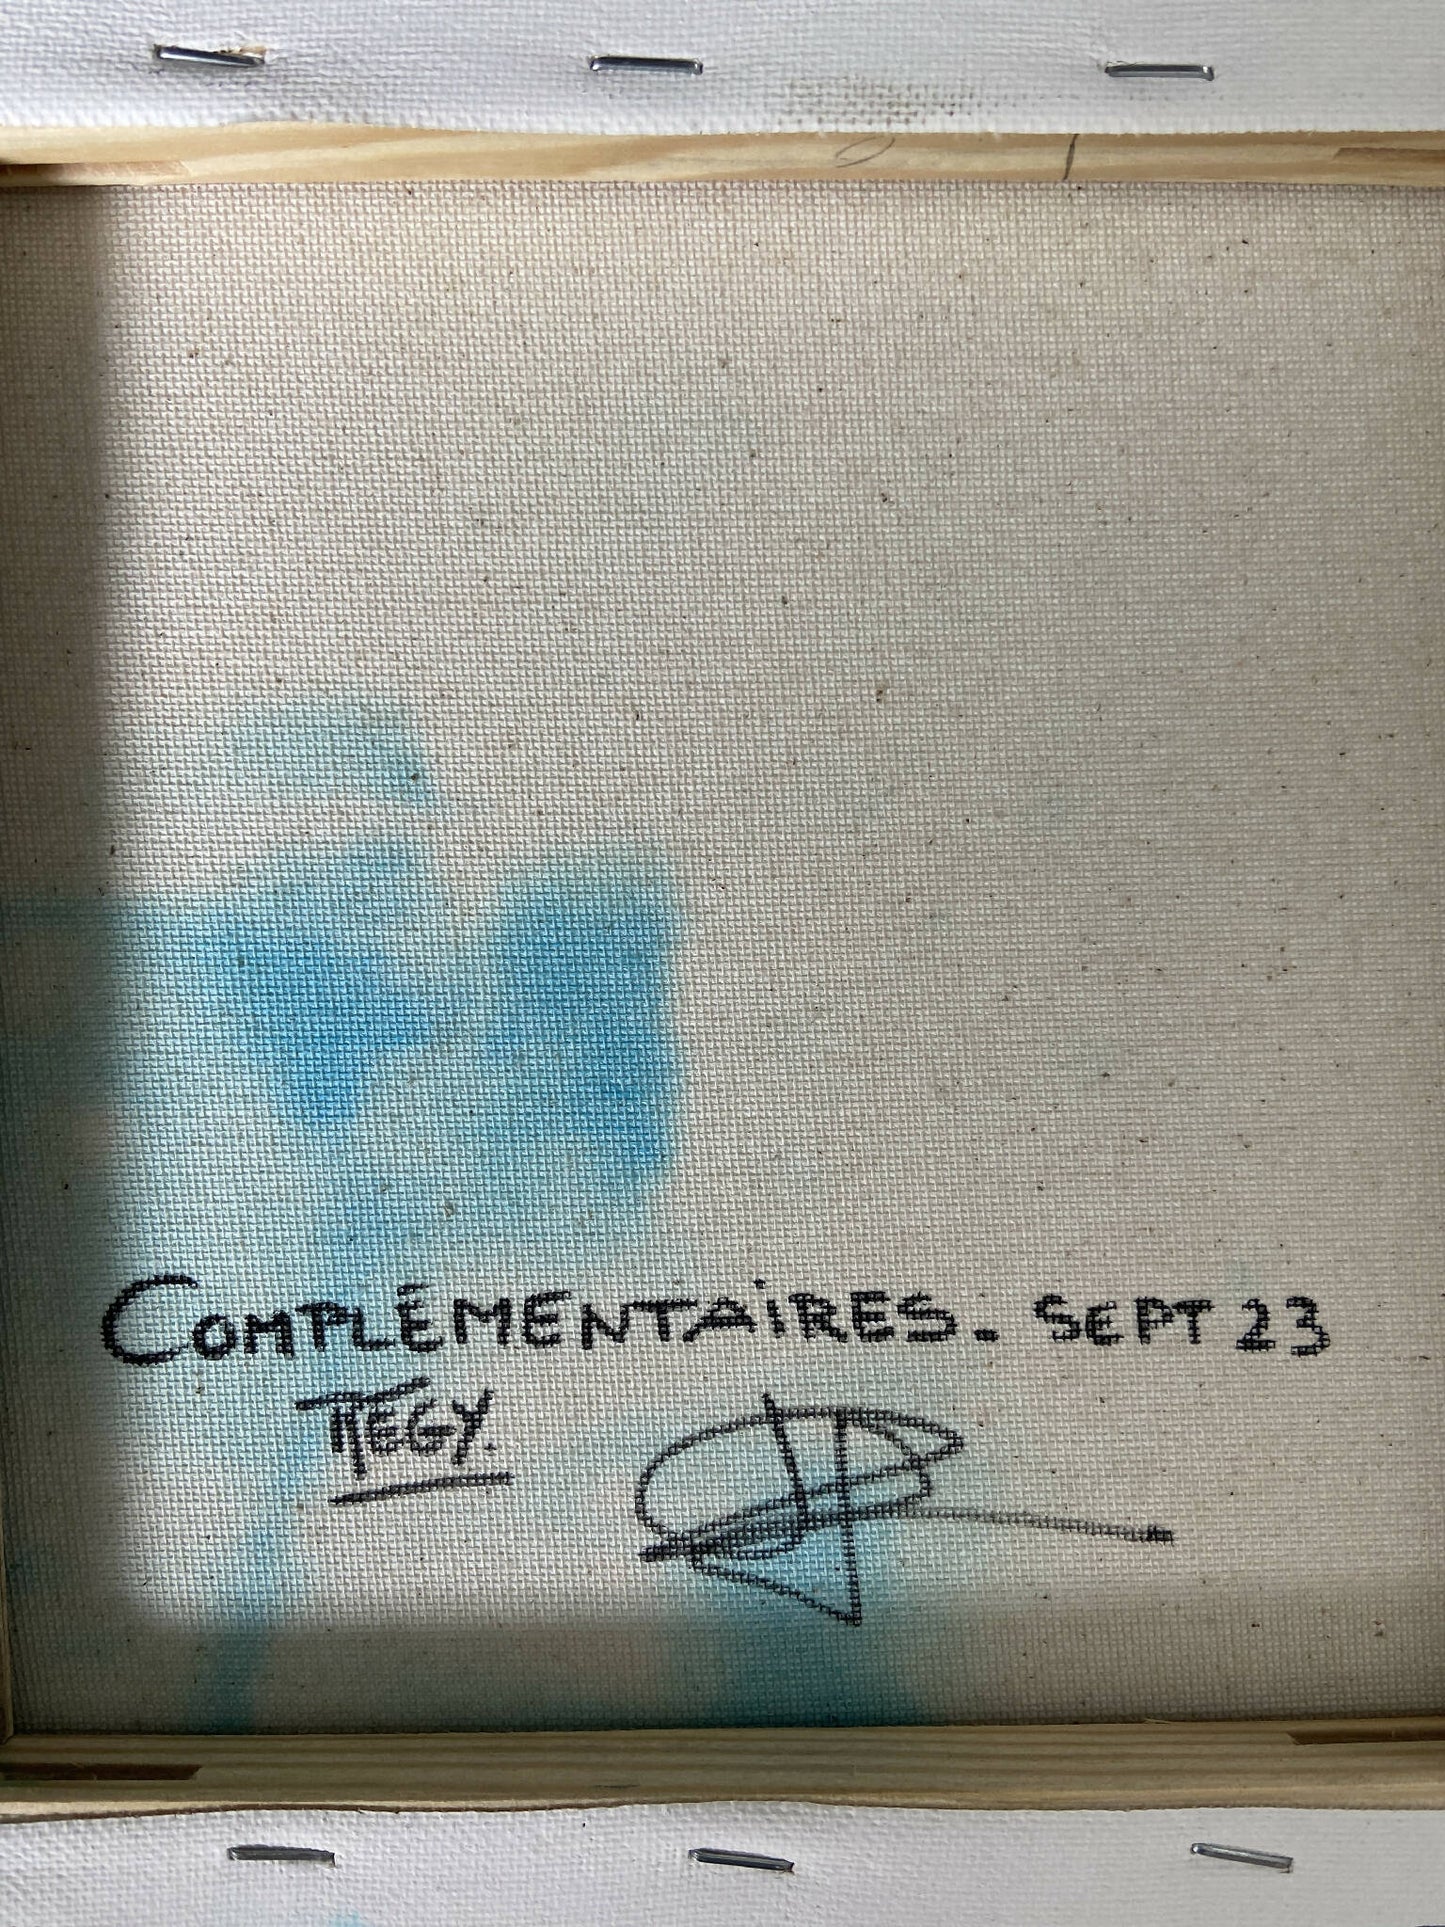 Abstract Painting "Complementaries, September 23"